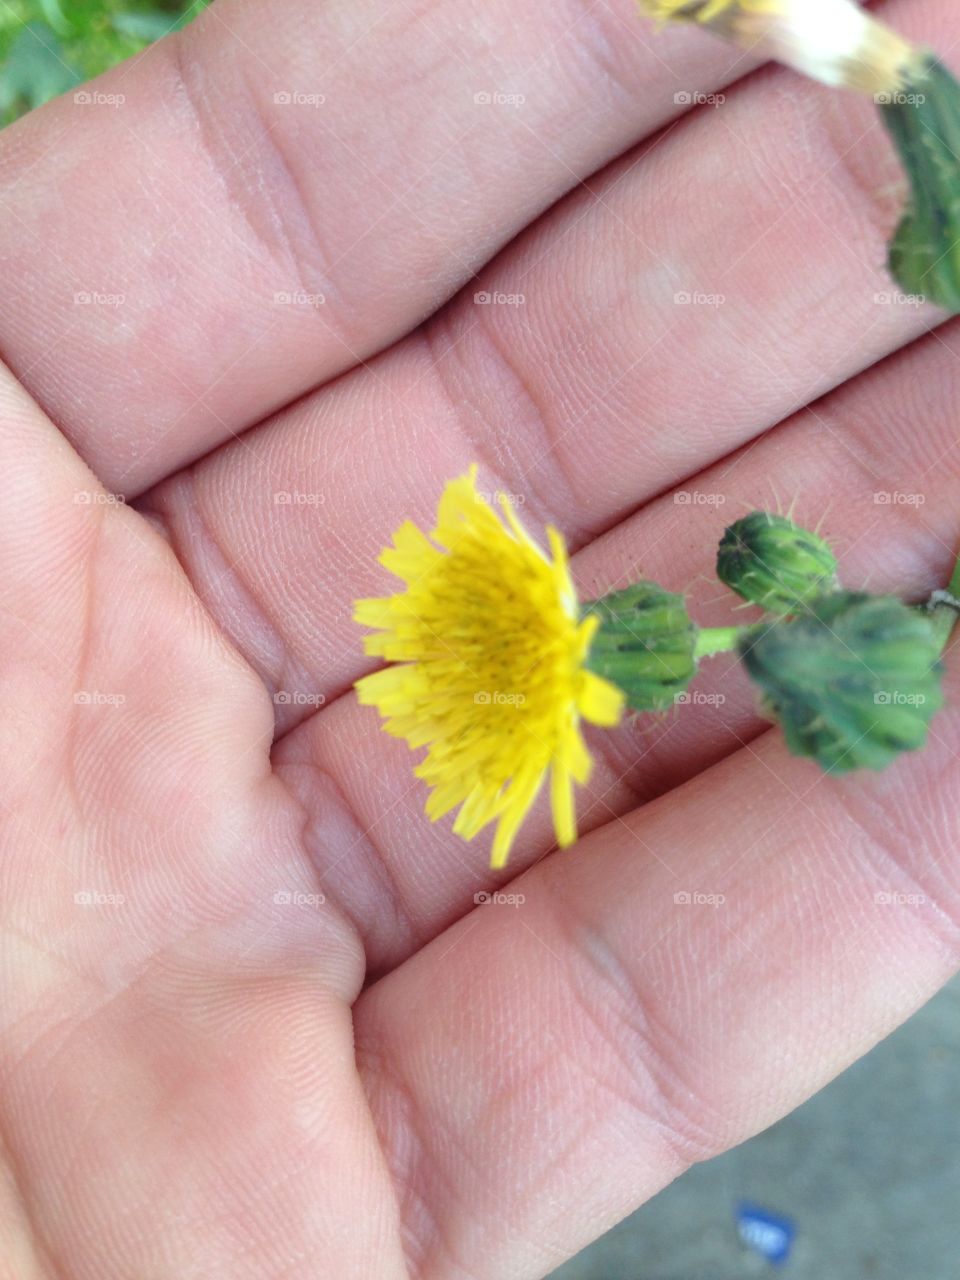 Small yellow flower over hand